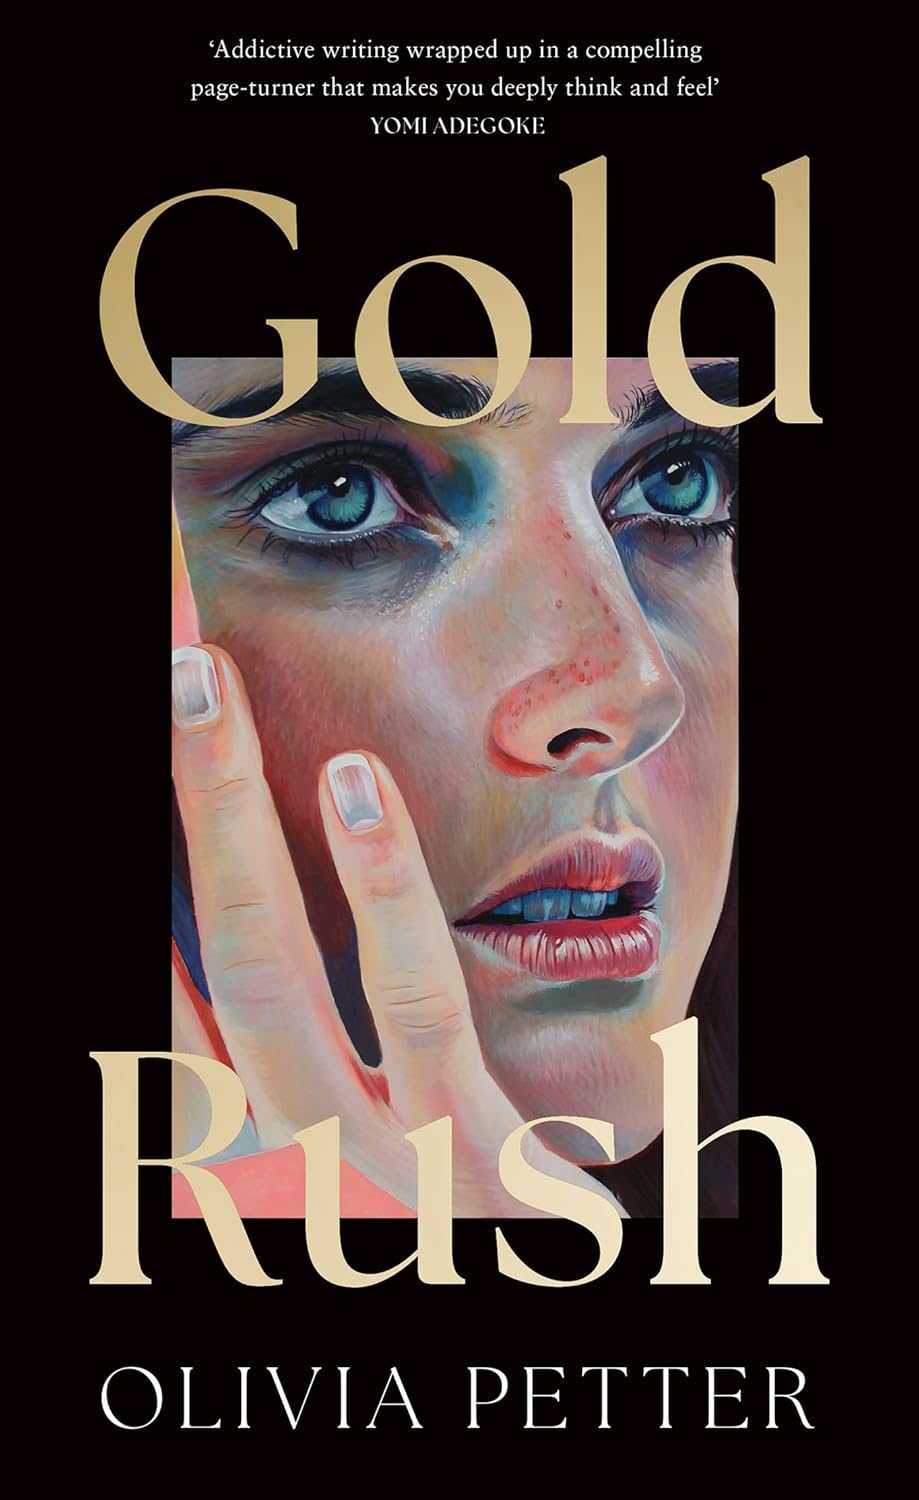 ‘Gold Rush’ by Olivia Petter is published on 18 July